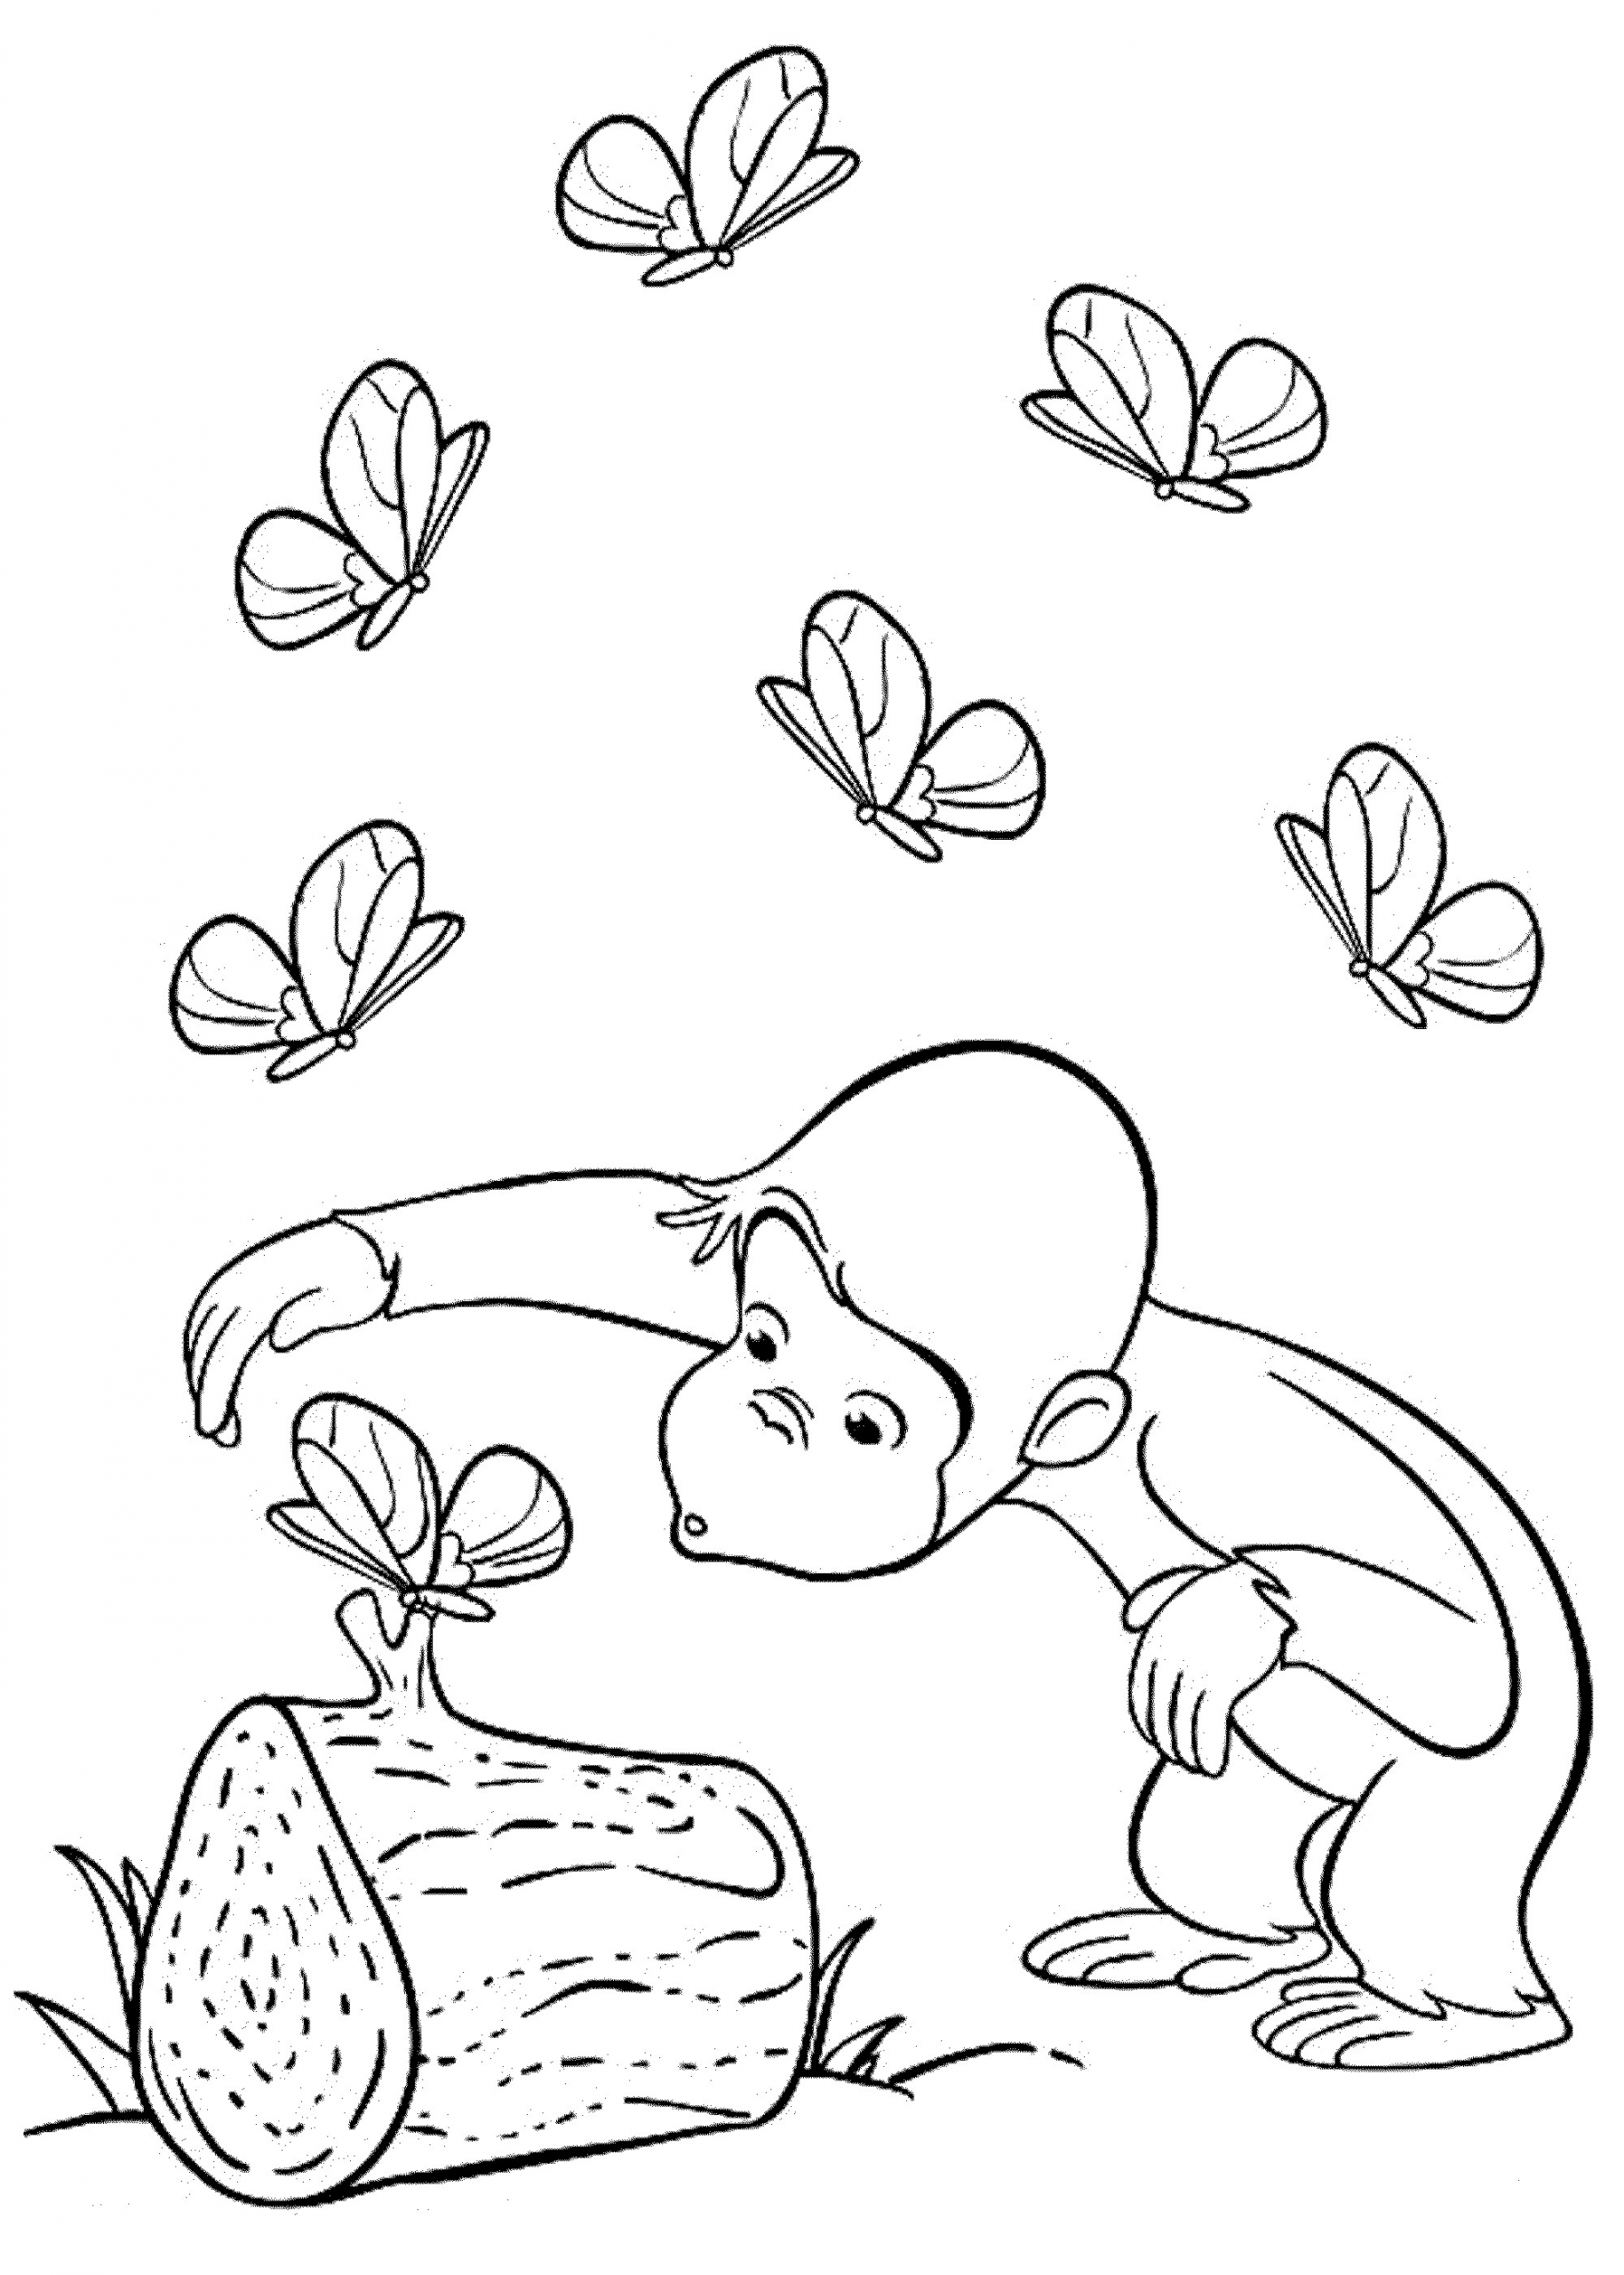 Best Coloring Books For Toddlers
 Curious George Coloring Pages Best Coloring Pages For Kids